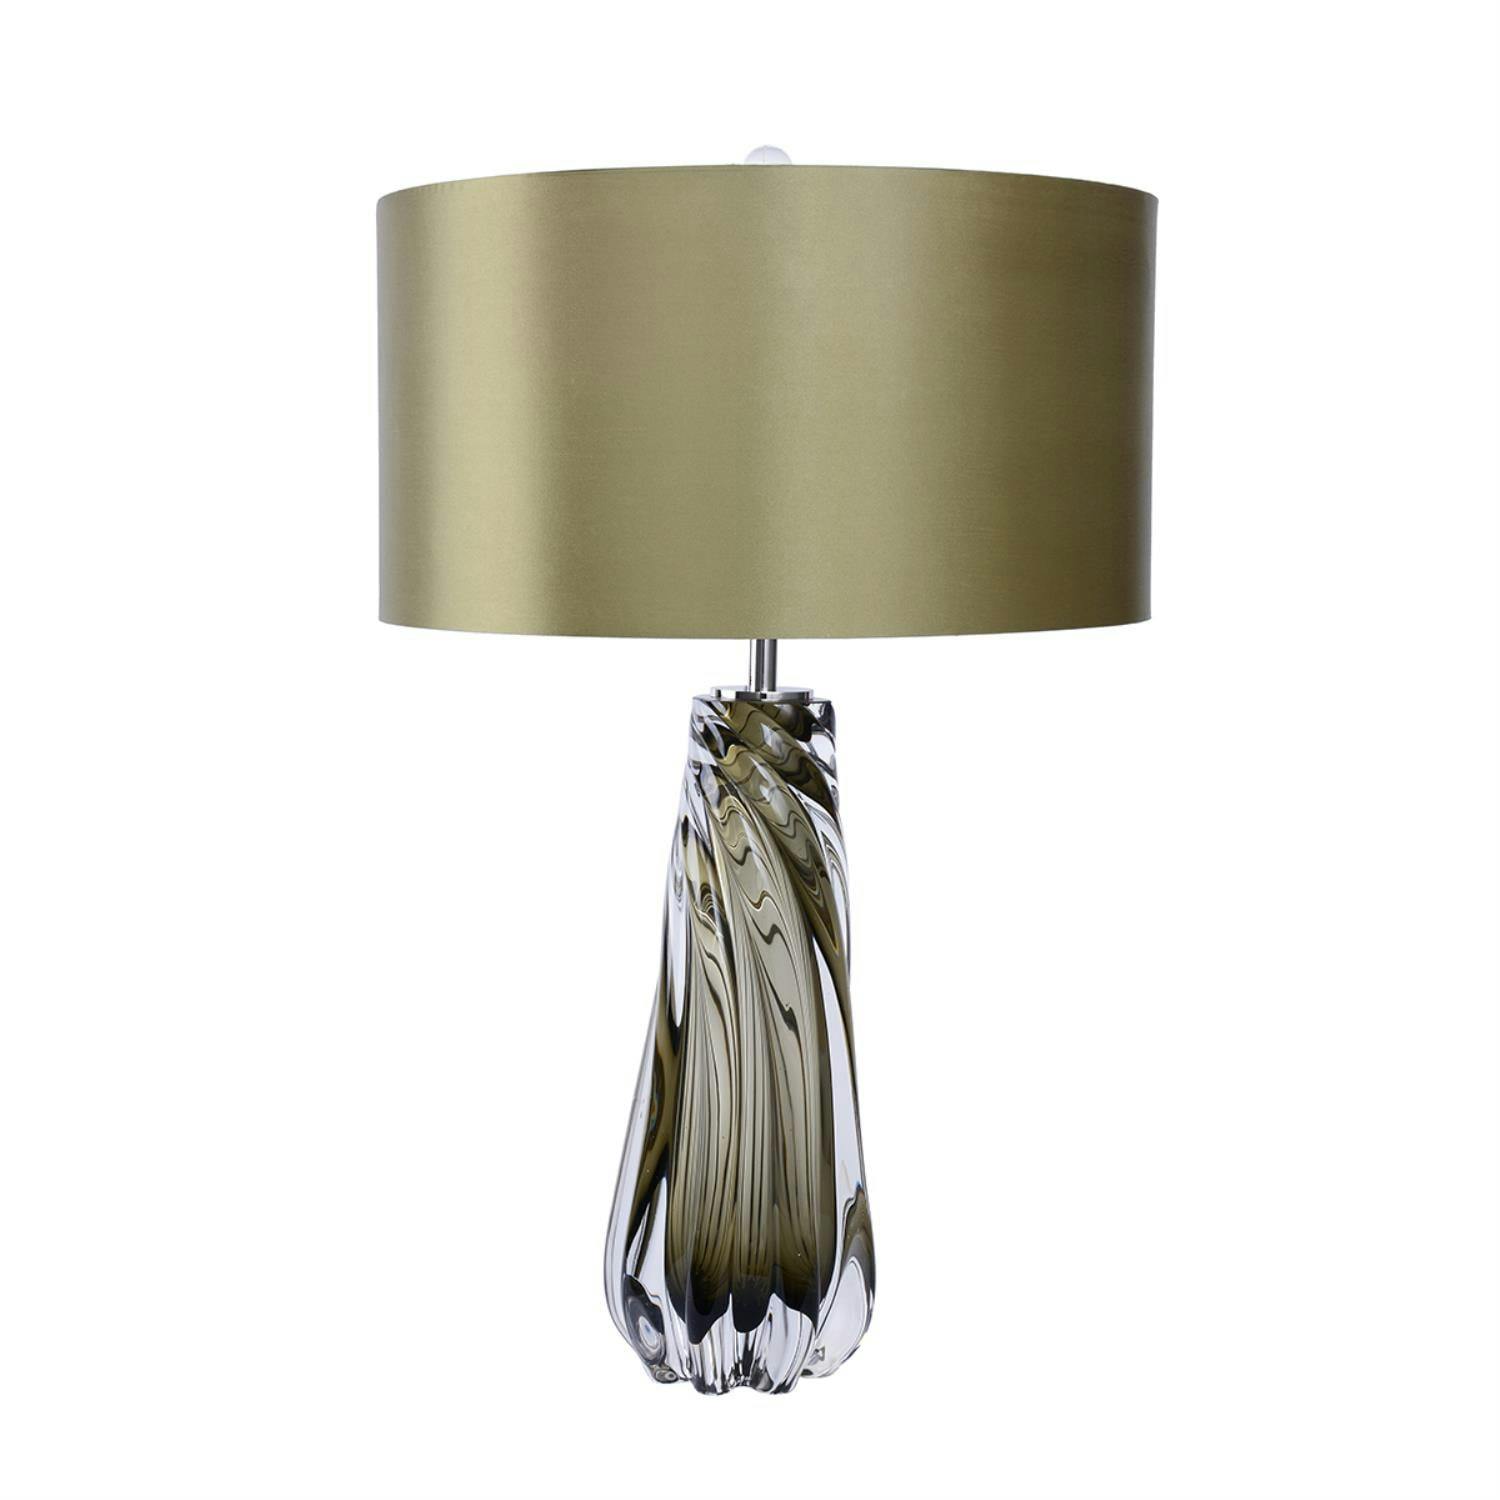 Smokey Grey & Olive Green Glass Table Lamp with Shimmery Drum Shade